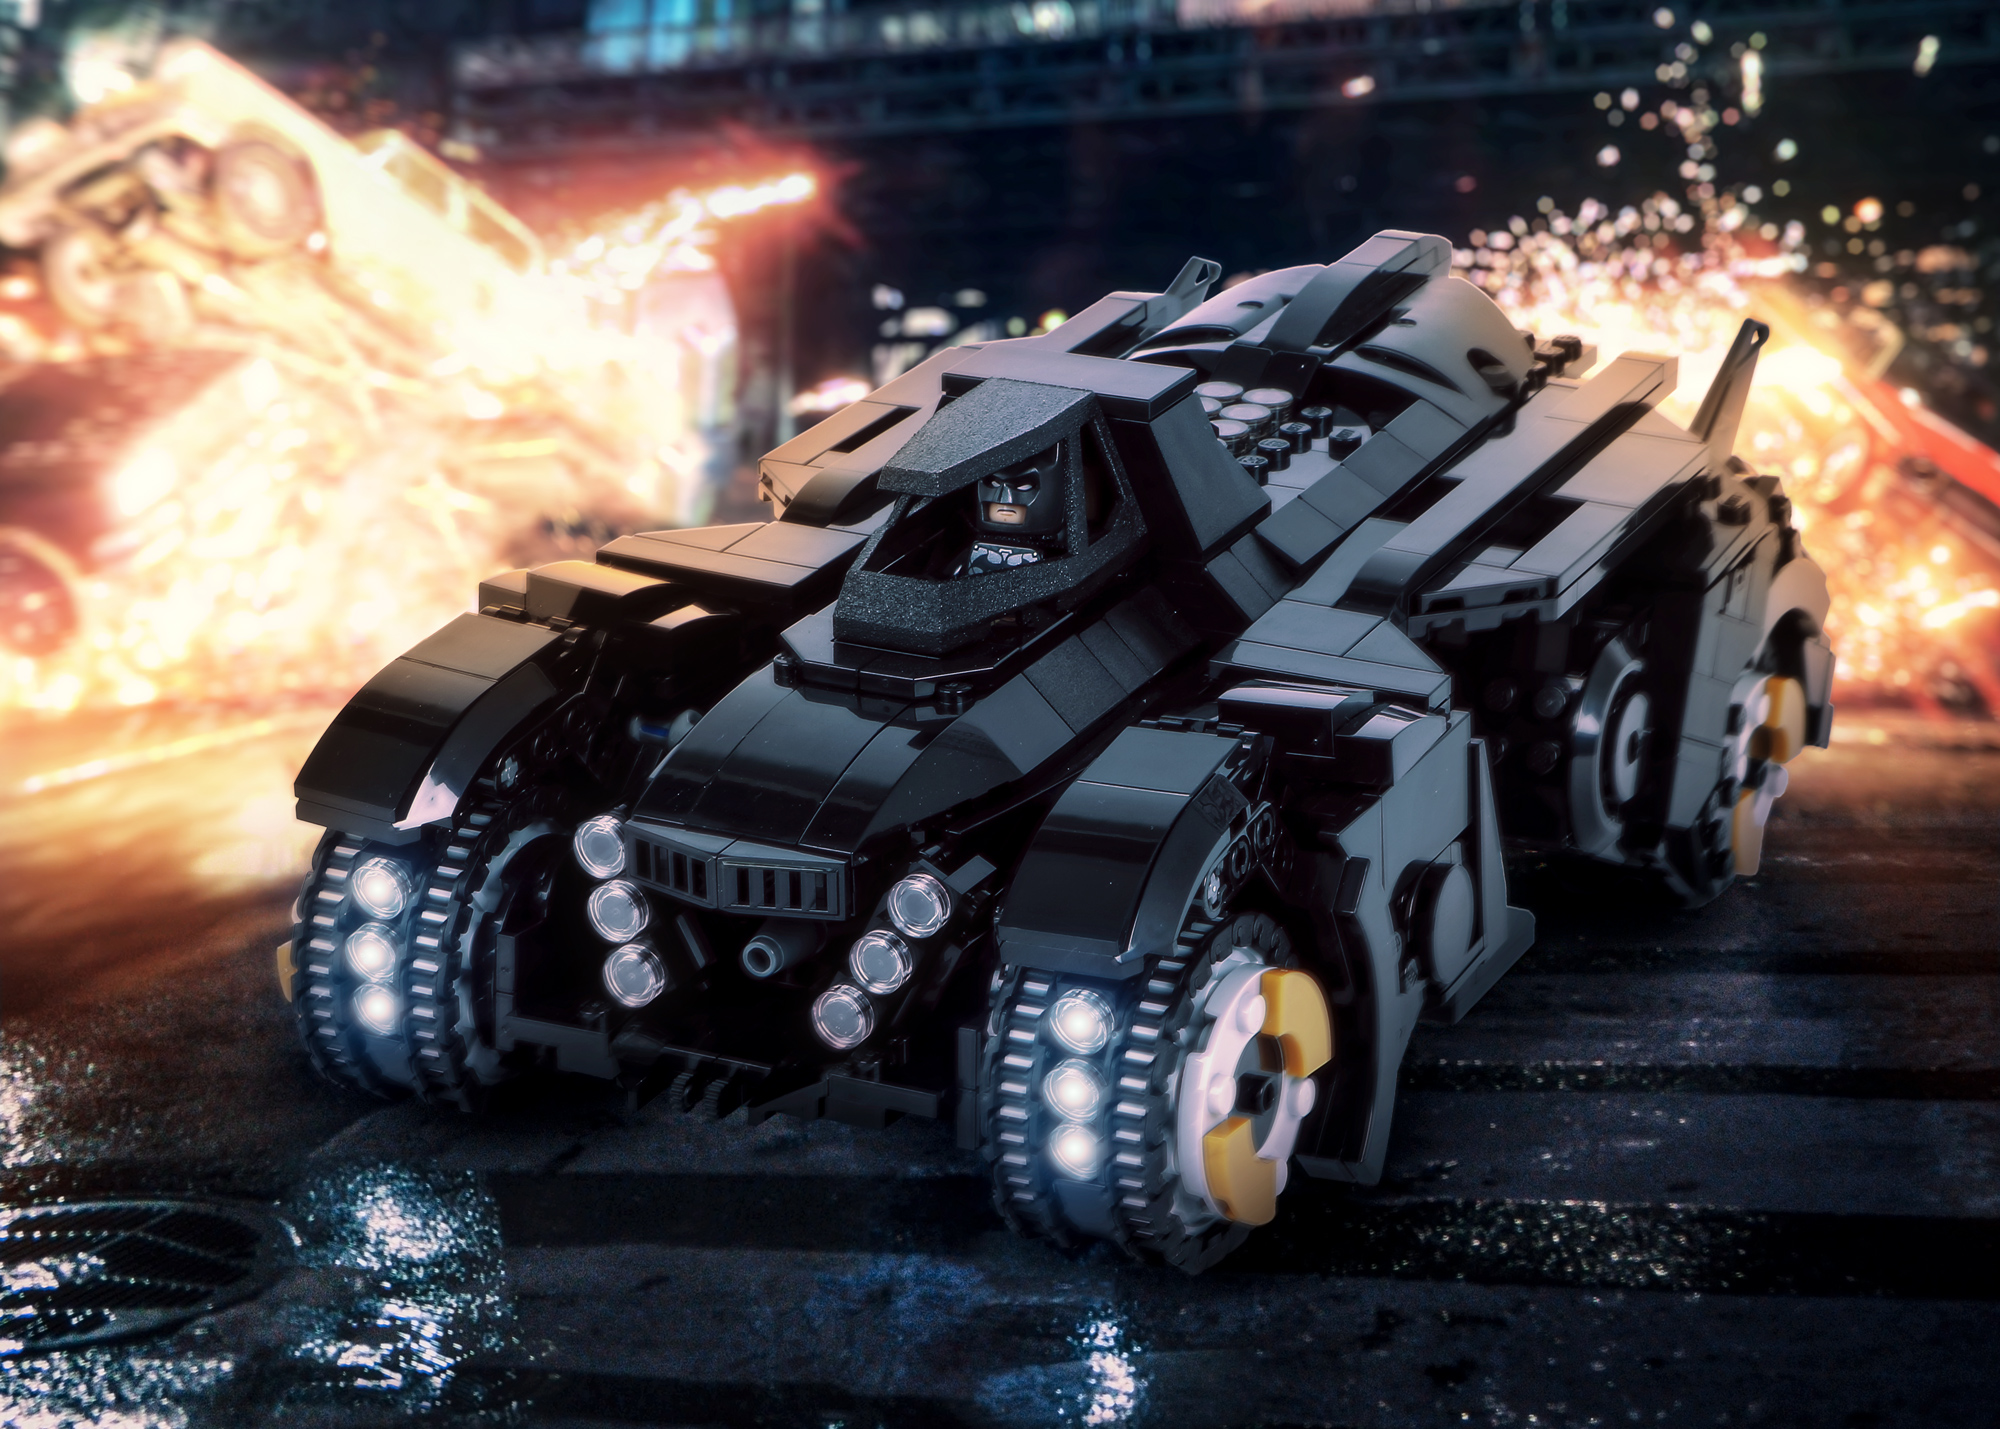 LEGO Arkham Knight Batmobile In Action by LittleWikis on DeviantArt